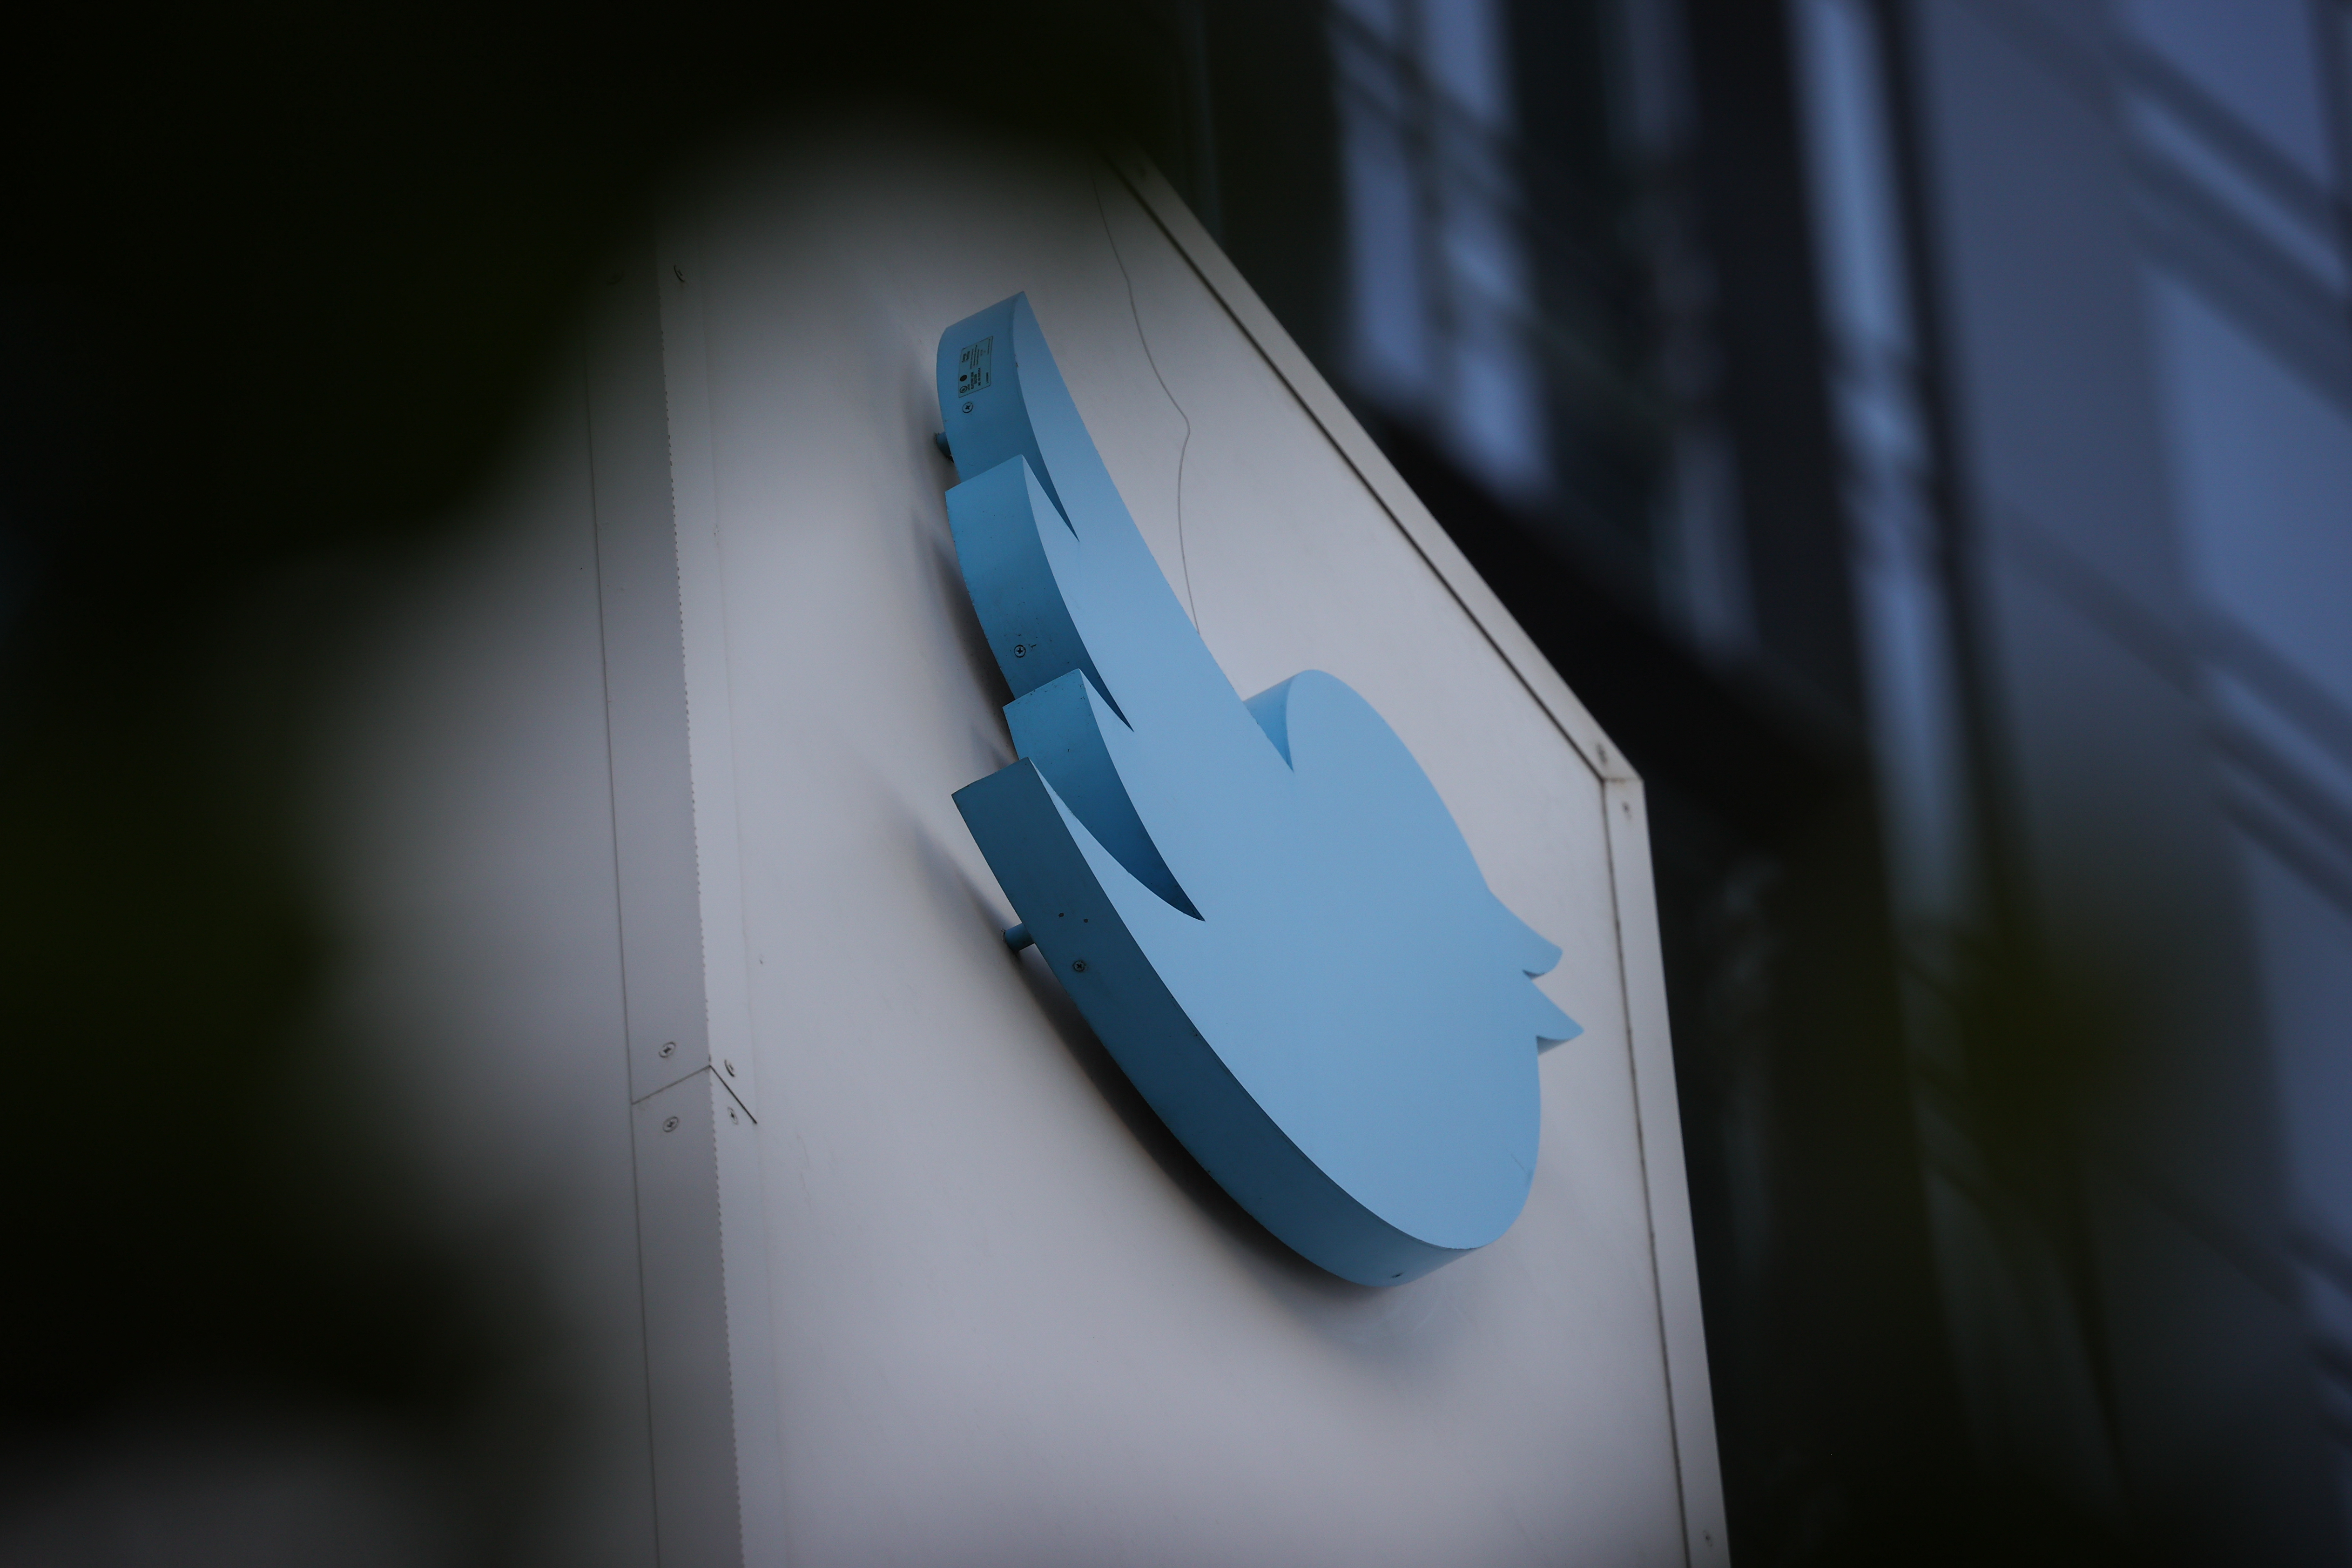 Twitter is shutting down its free API, here’s what’s going to break